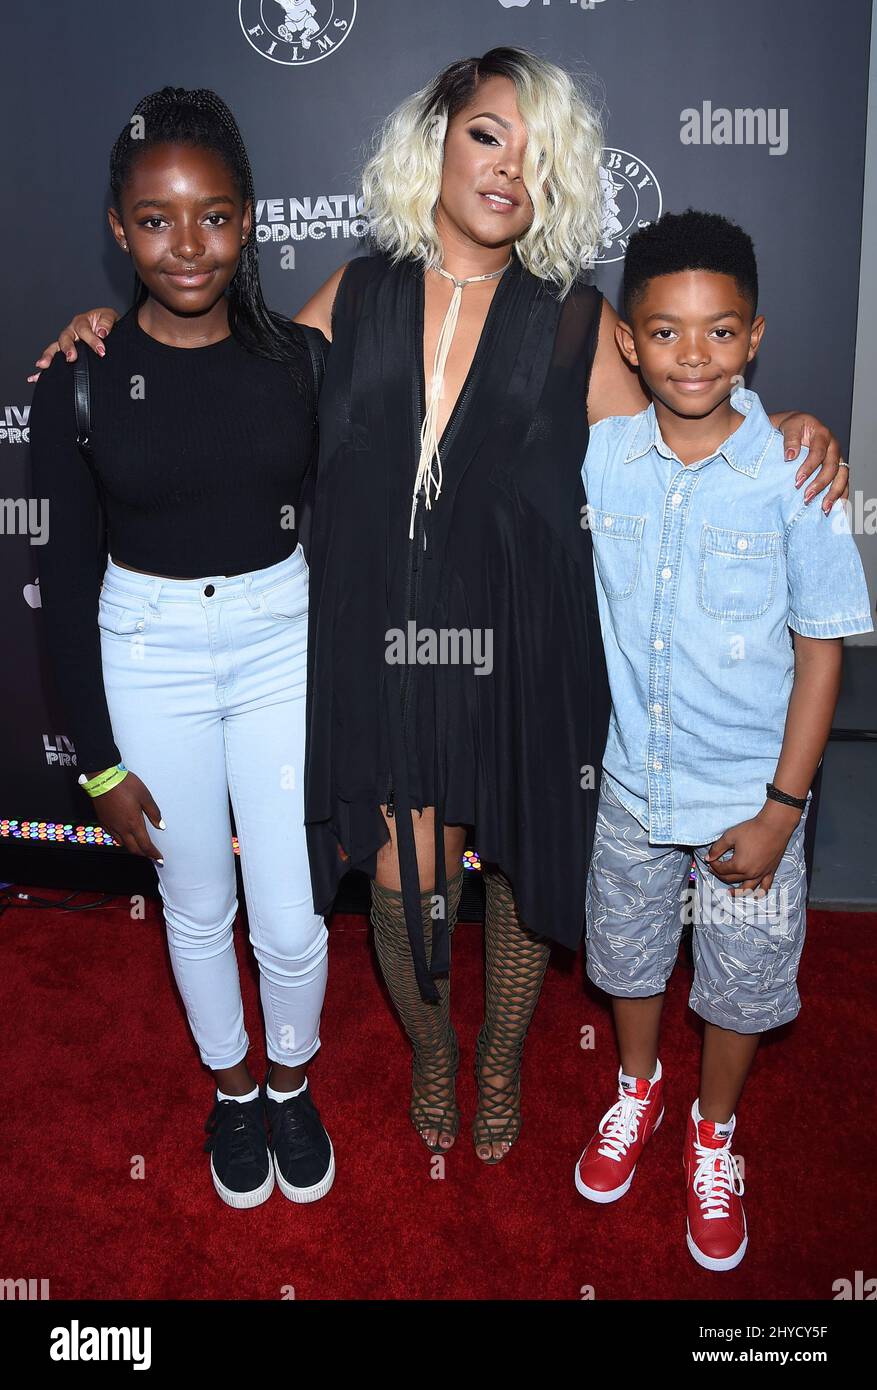 K'mari Mae Epps, Keisha Spivey Epps and Amir Epps attending the 'Can't Stop, Won't Stop: A Bad Boy Story' premiere held at the Writers Guild of America in Los Angeles, USA Stock Photo